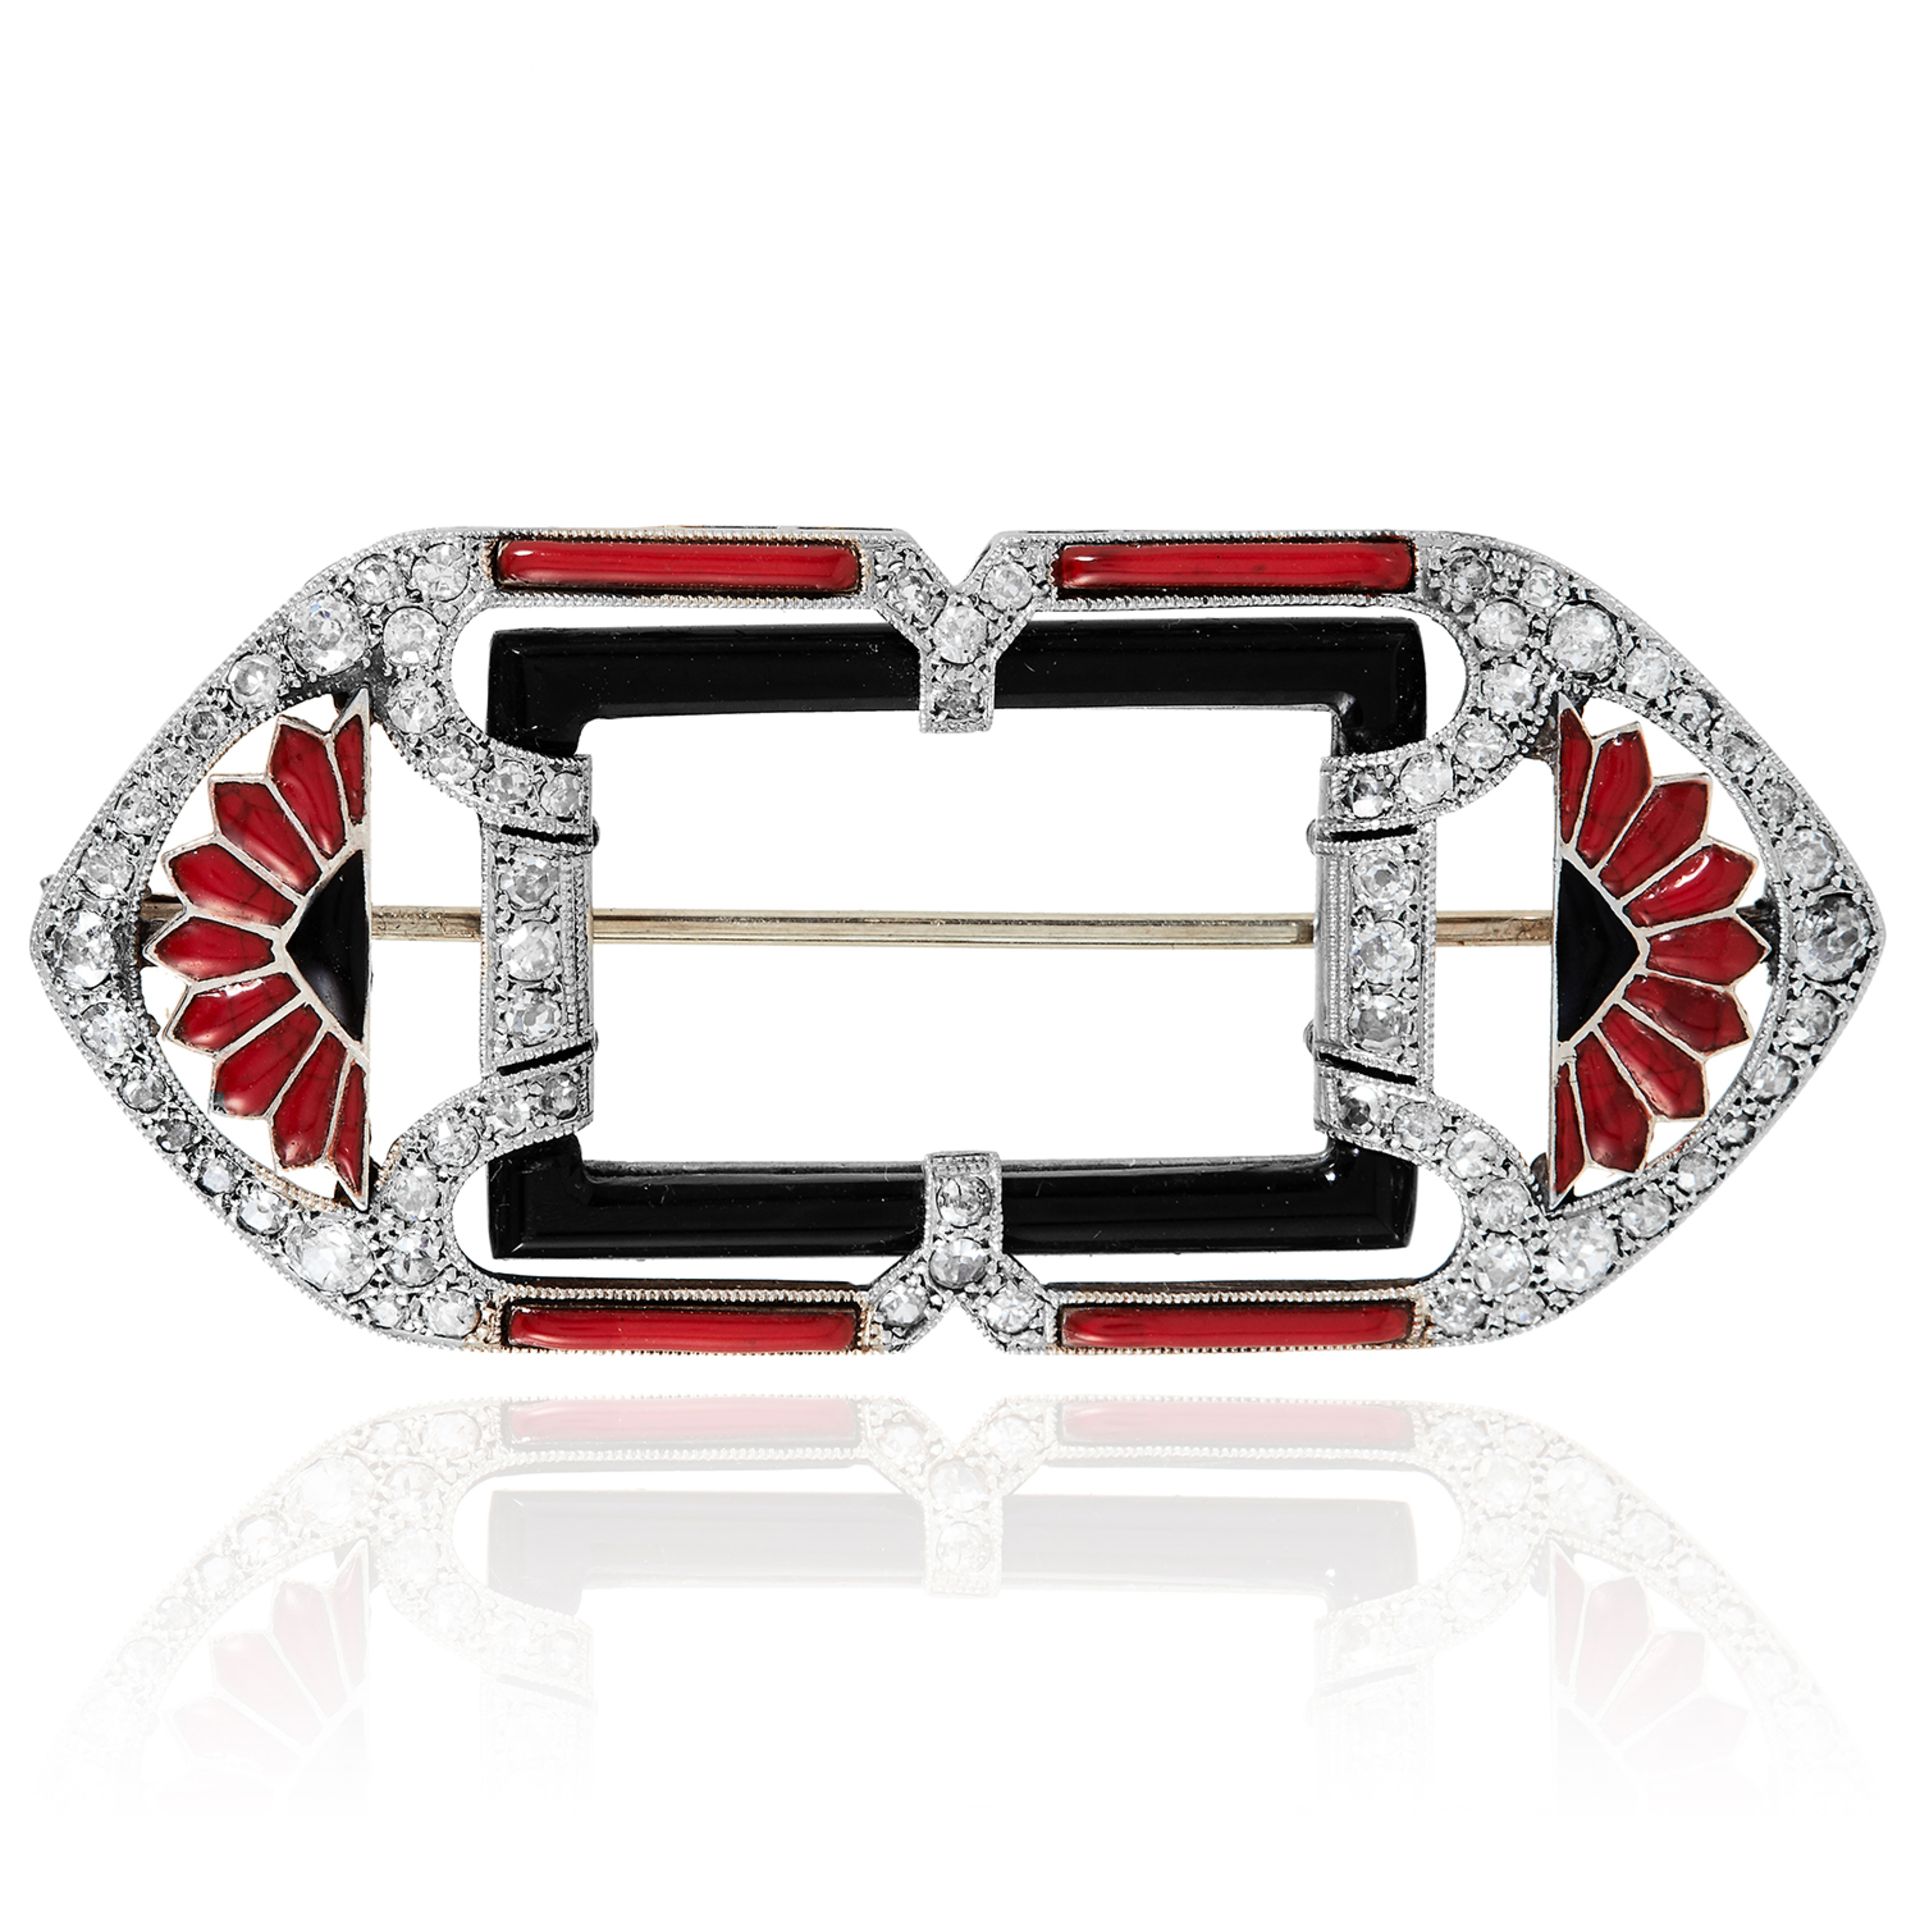 AN ART DECO DIAMOND, ONYX AND ENAMEL BROOCH in white gold or platinum, in Art Deco design,